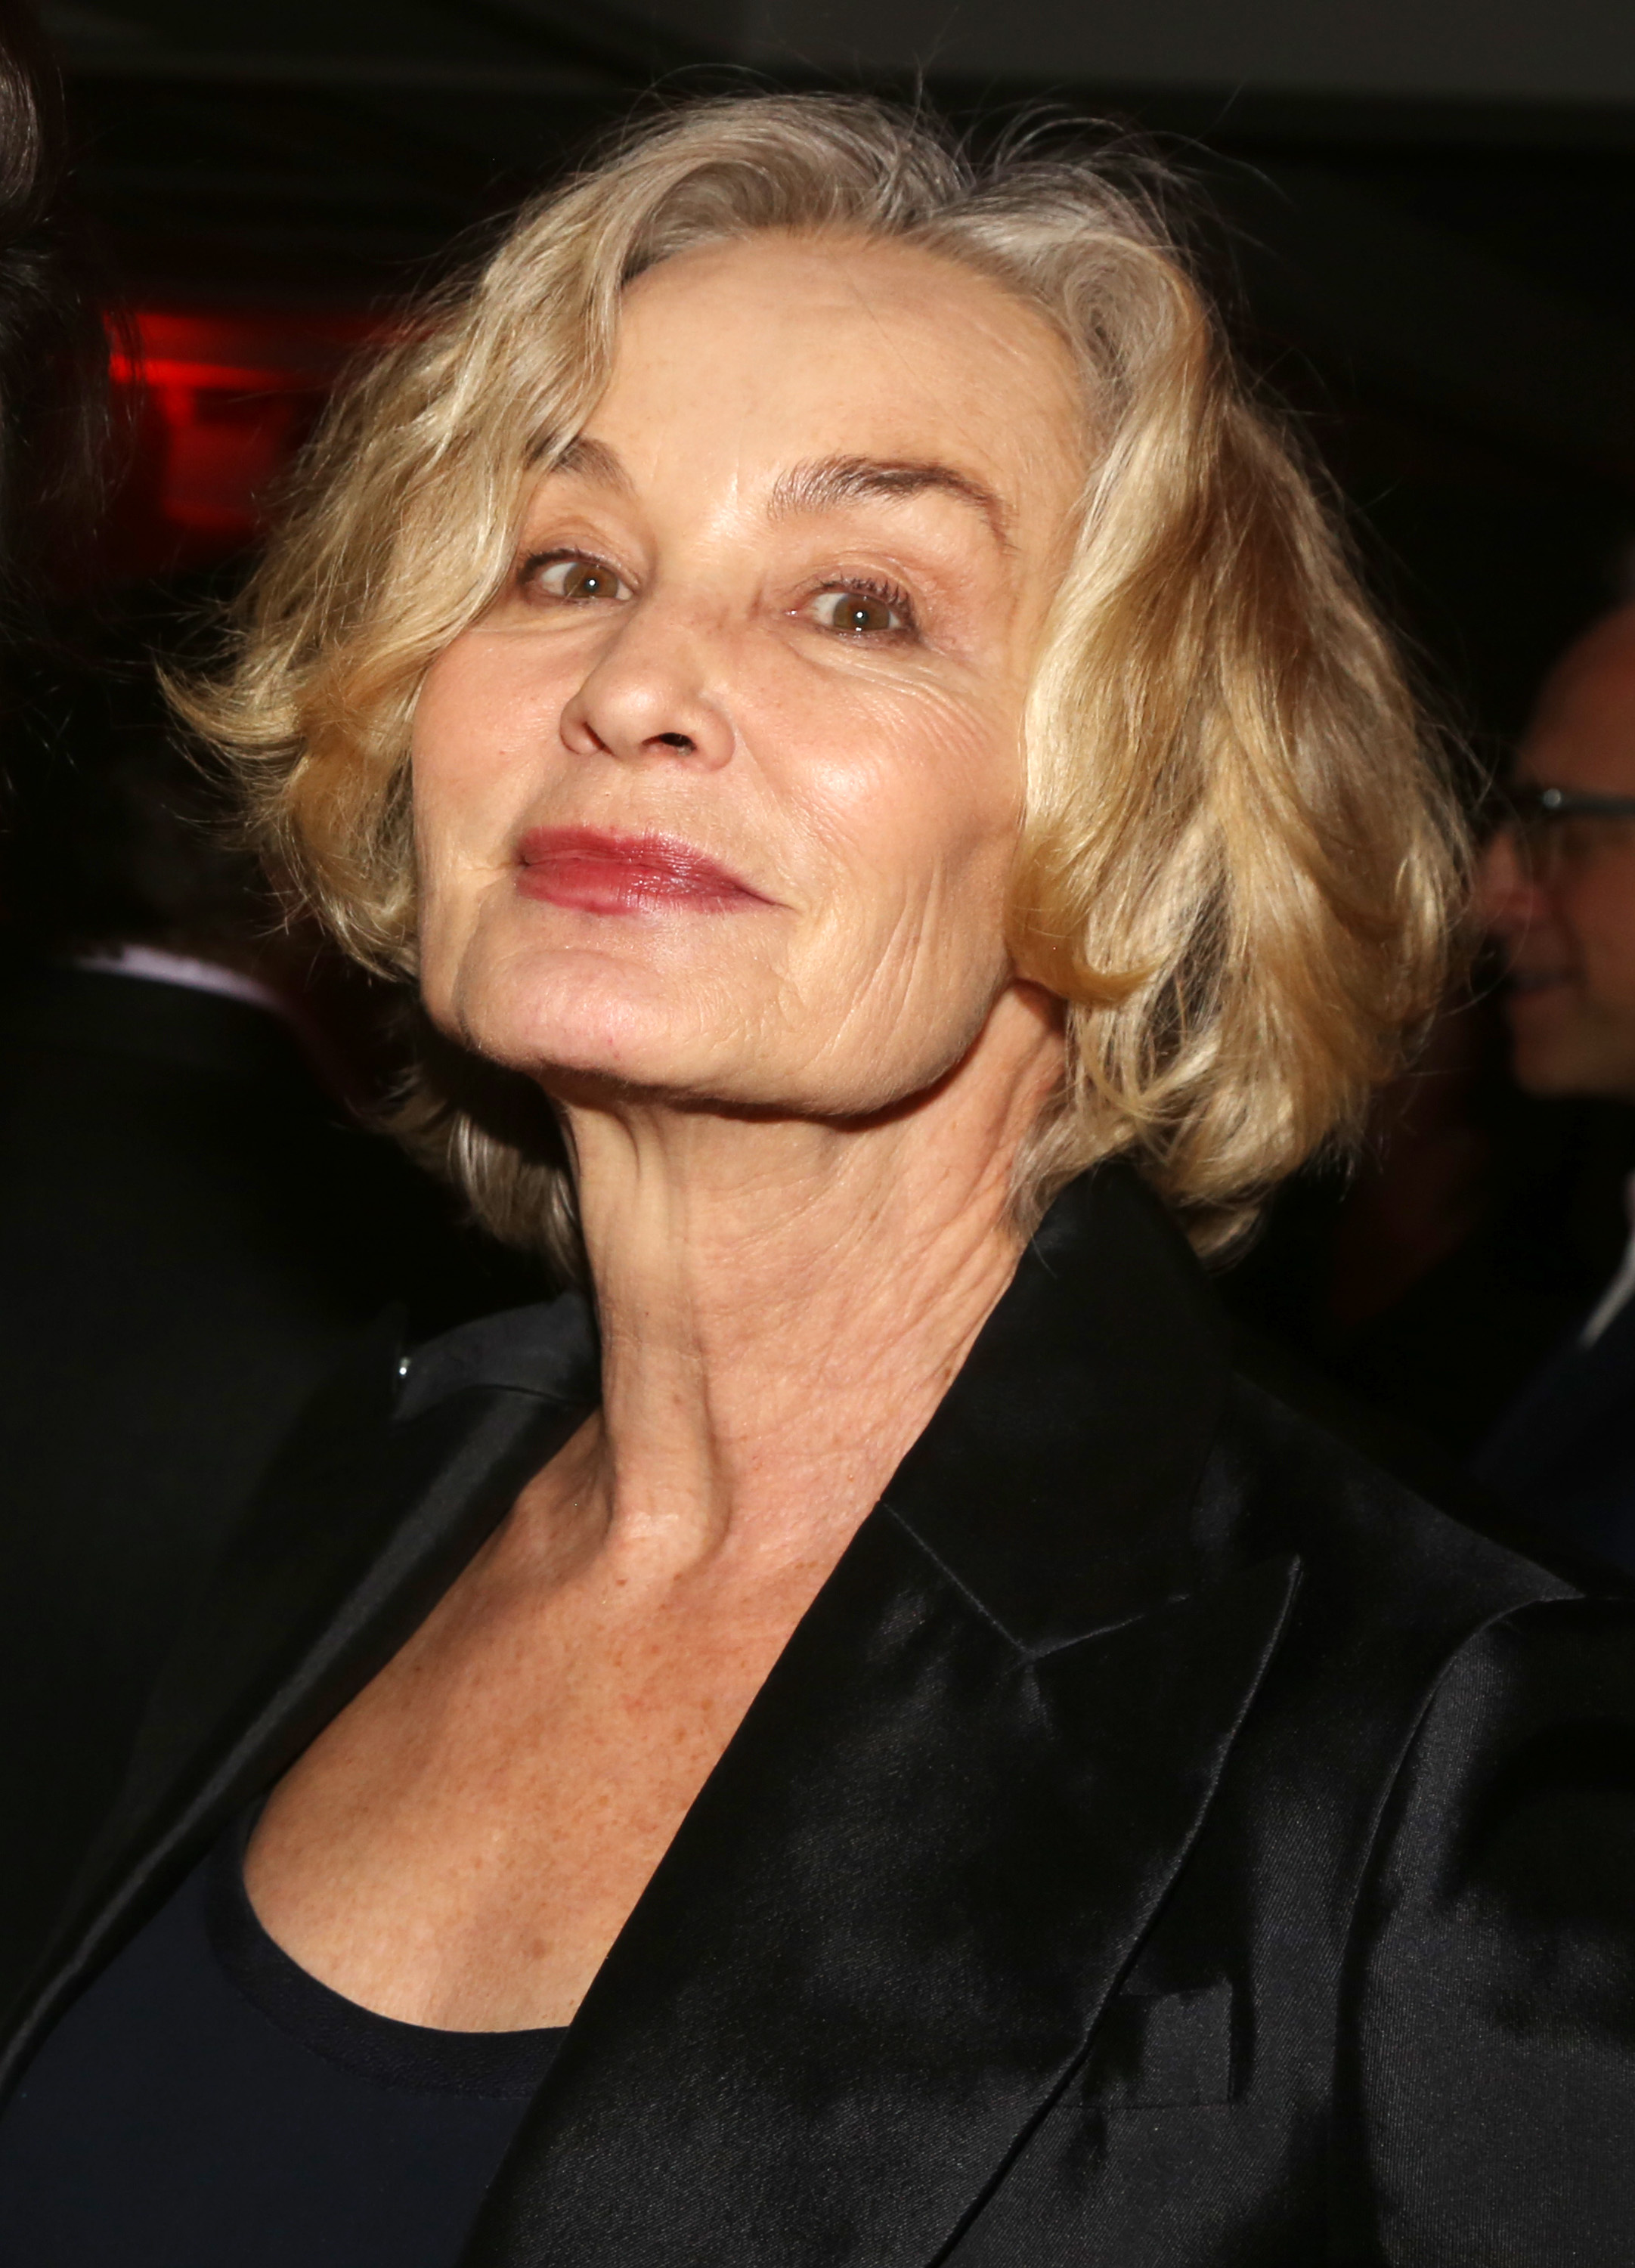 Jessica Lange at the Roundabout Theater Gala in New York City on March 2, 2020 | Source: Getty Images